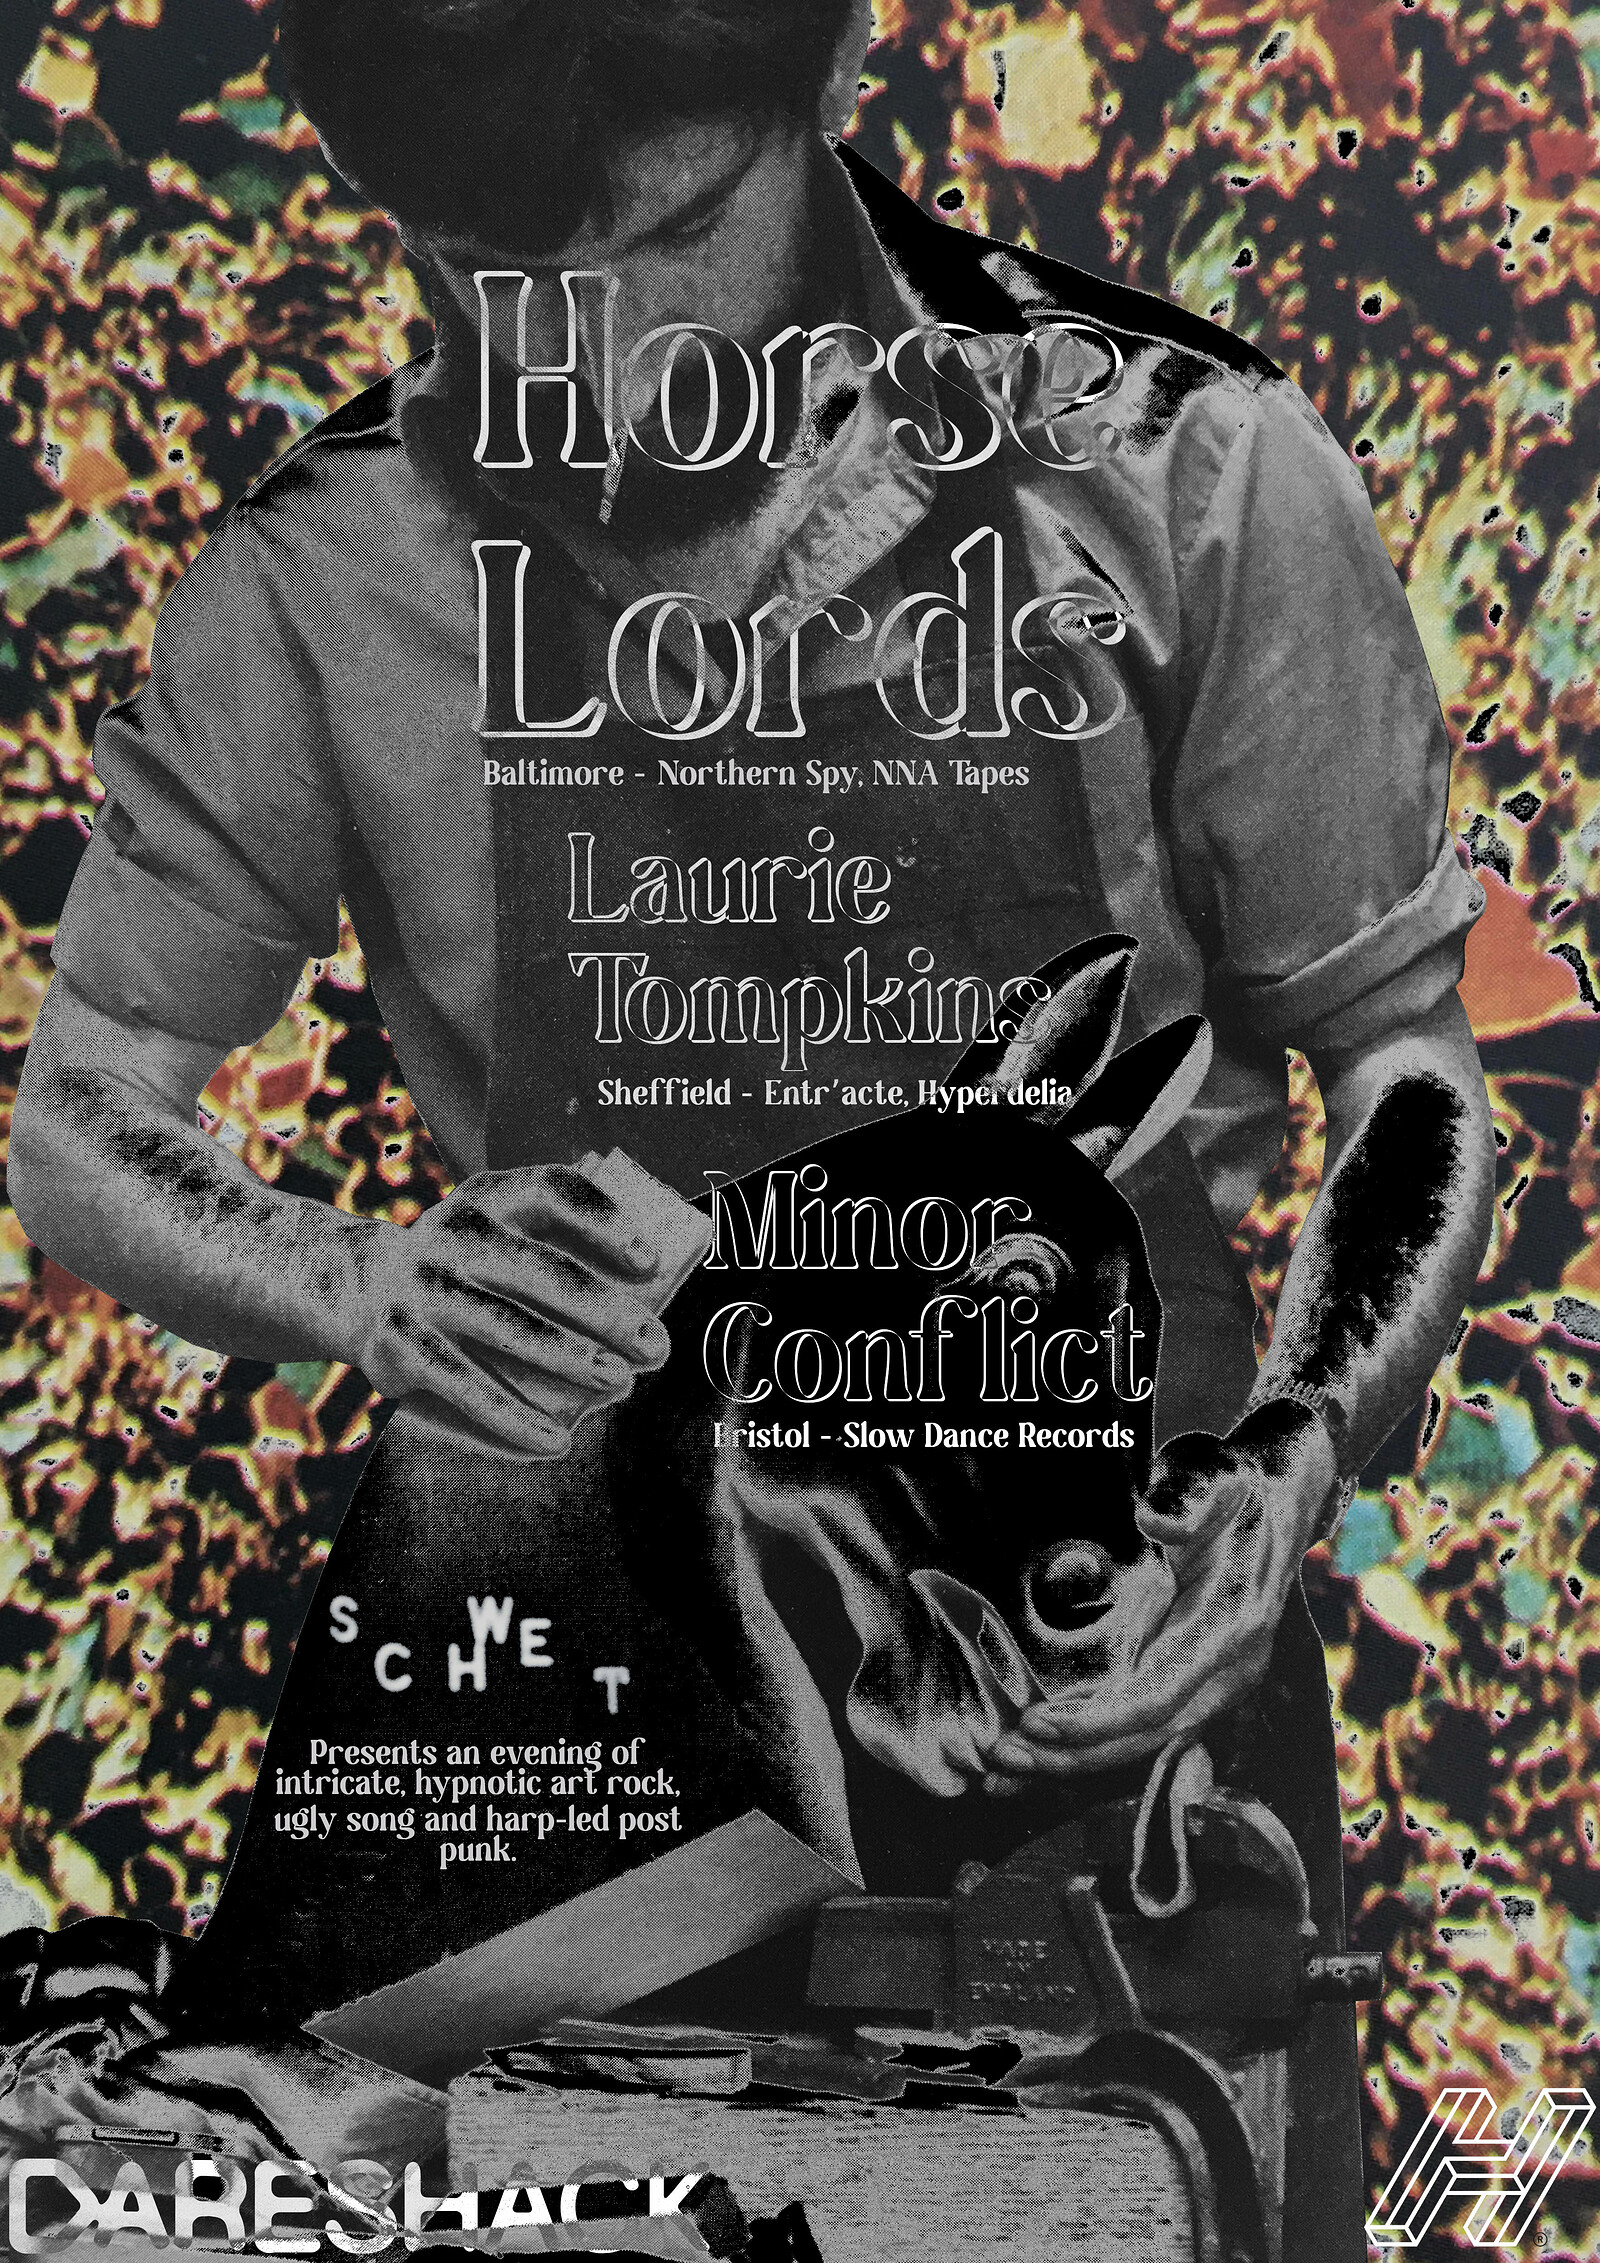 Horse Lords, Laurie Tompkins & Minor Conflict at Dareshack